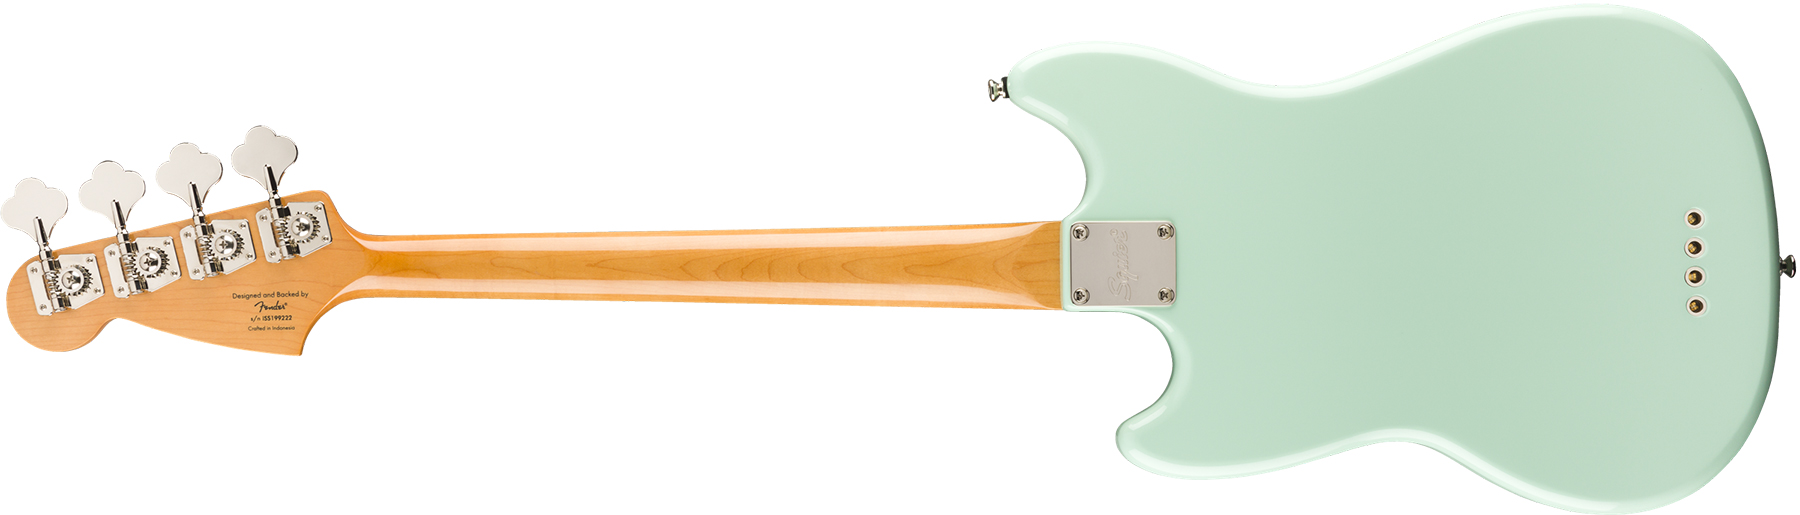 Squier Mustang Bass '60s Classic Vibe Lau 2019 - Seafoam Green - Solidbody E-bass - Variation 1